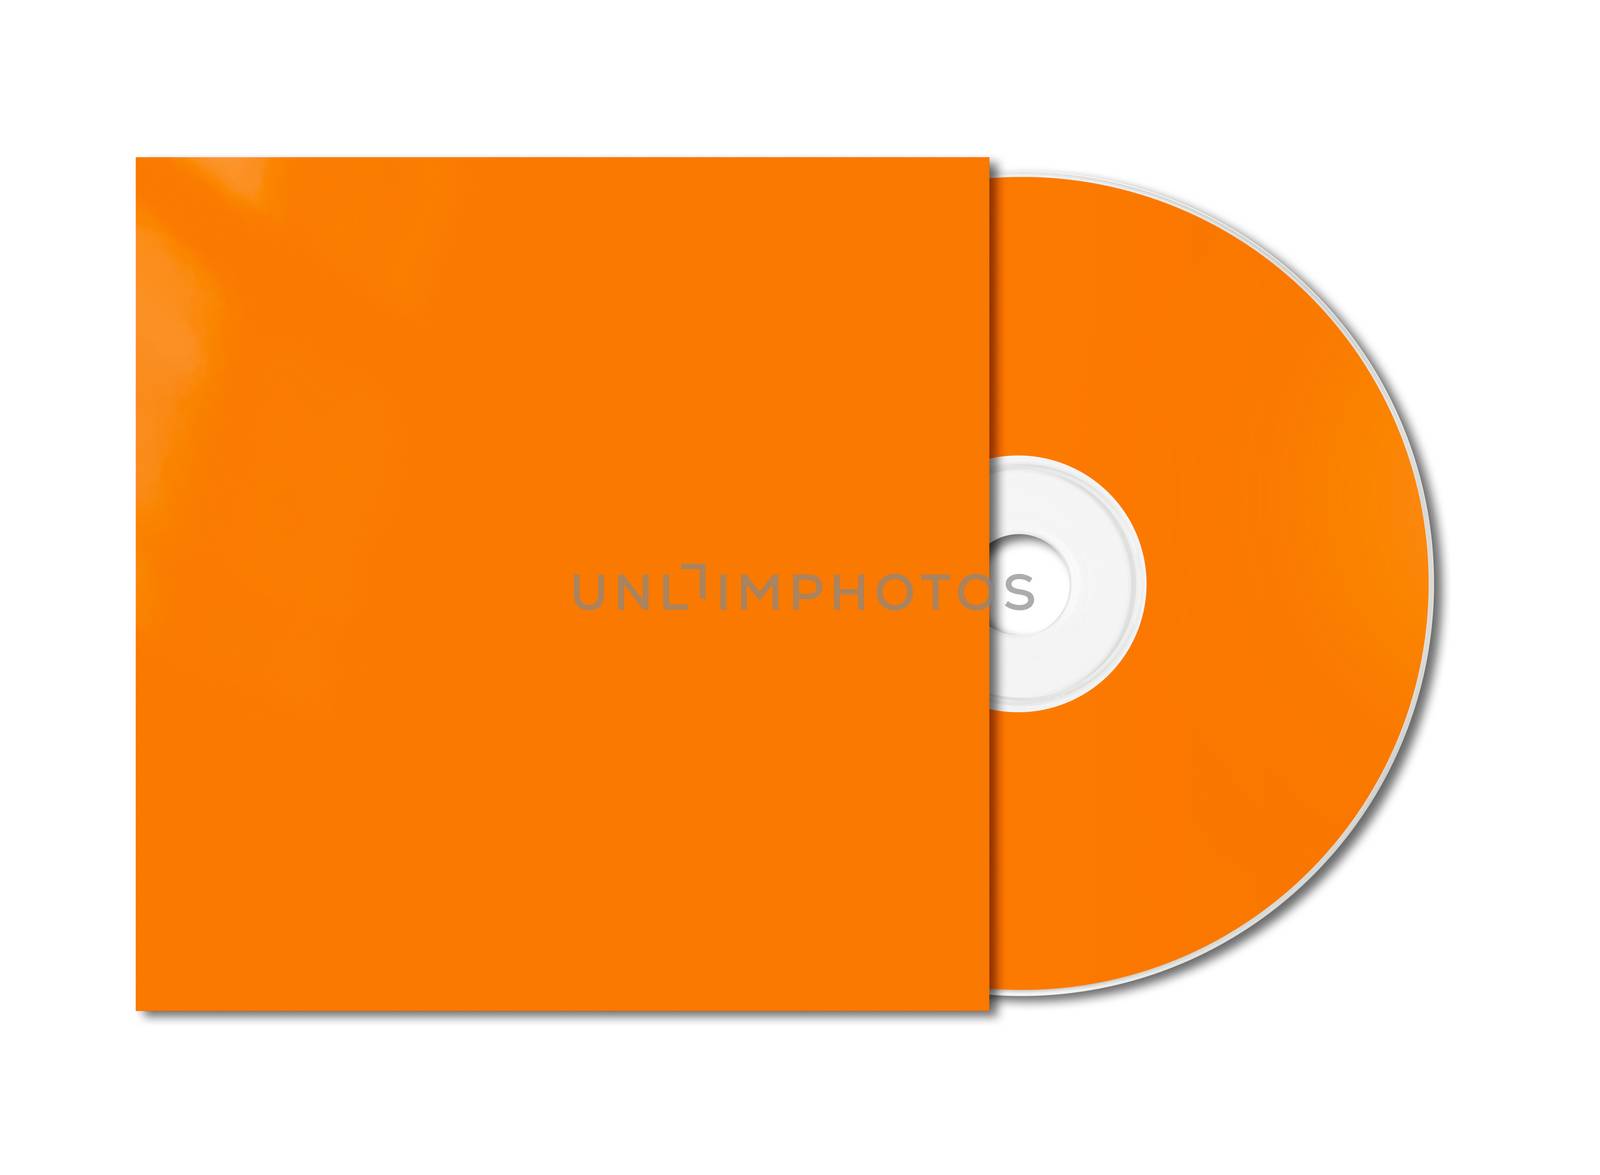 Orange CD - DVD and cover mockup template isolated on white